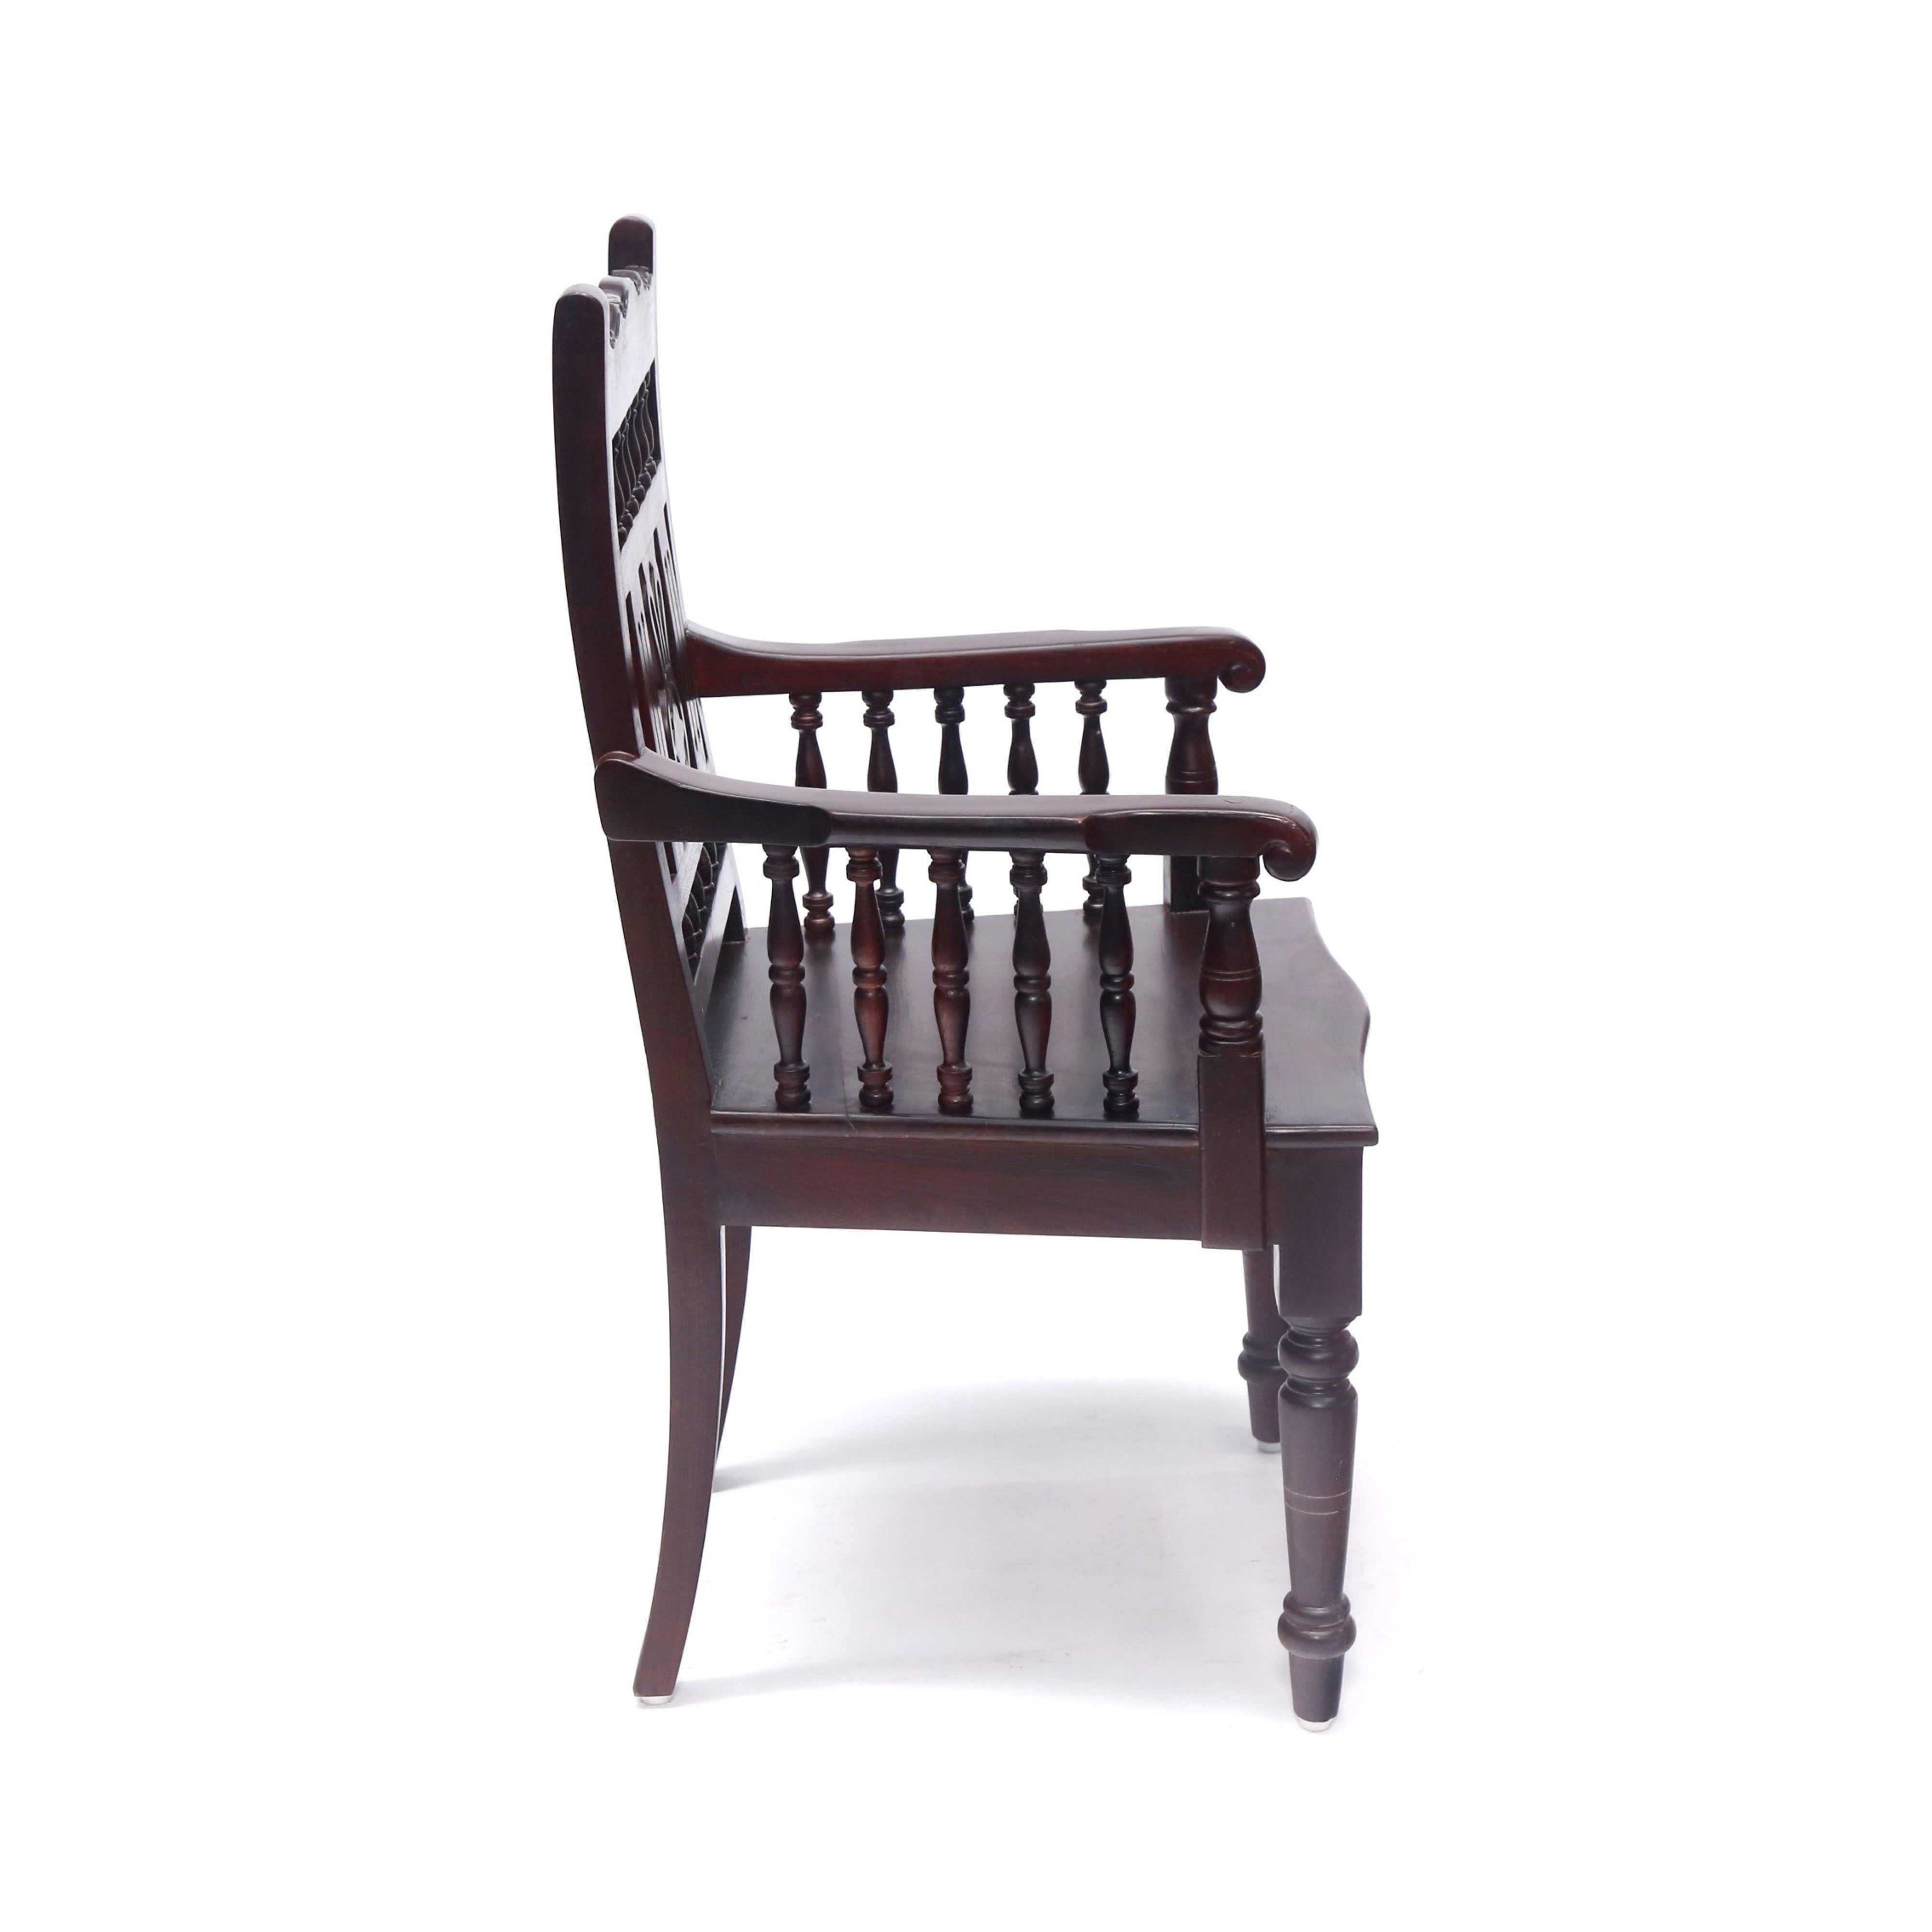 Mahogany Tone Intricate Royal Carved Chair Arm Chair